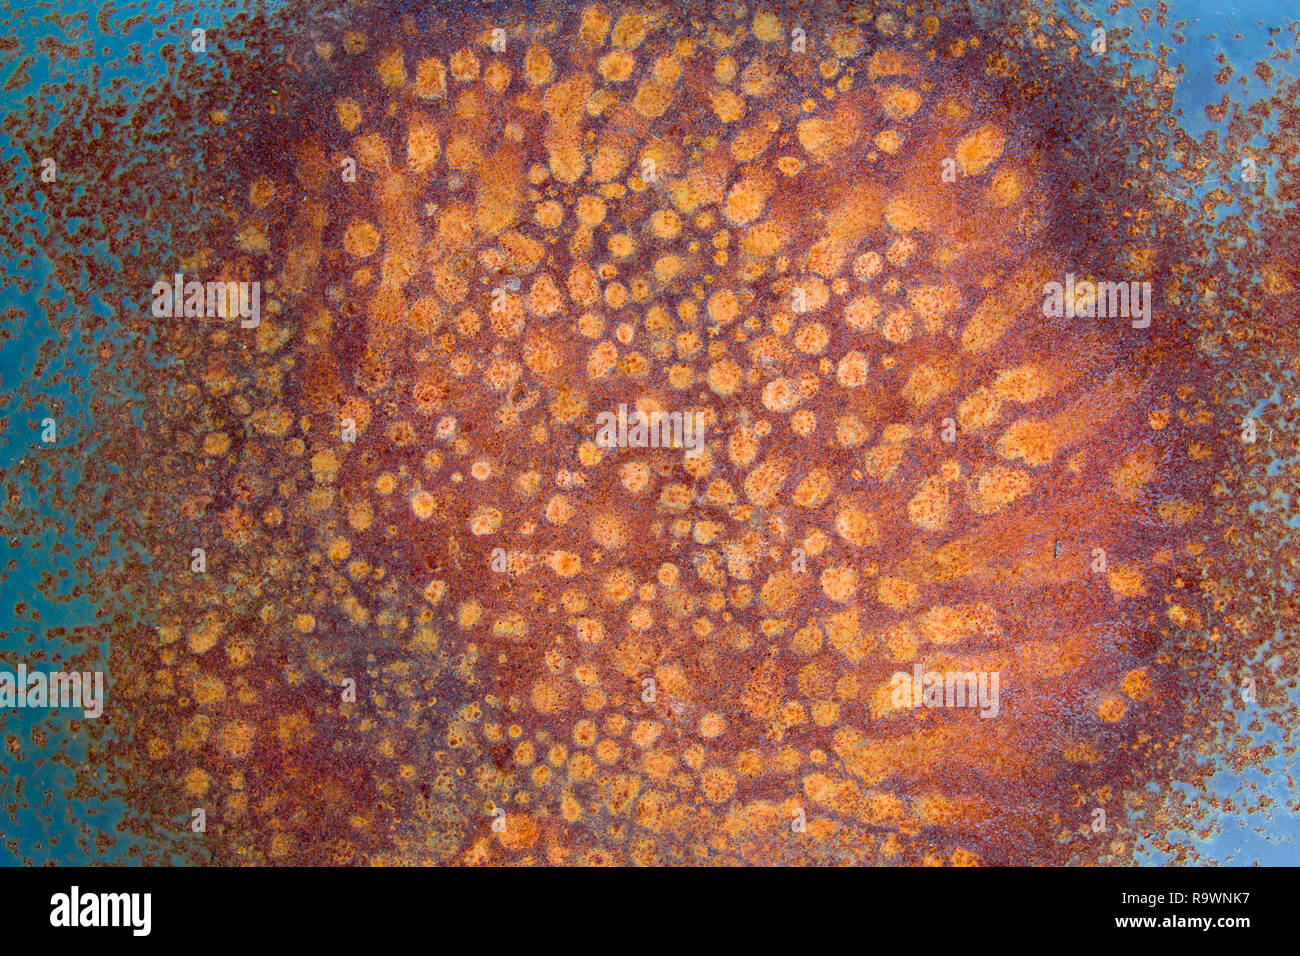 Detail of the rust stains on the metal surface Stock Photo